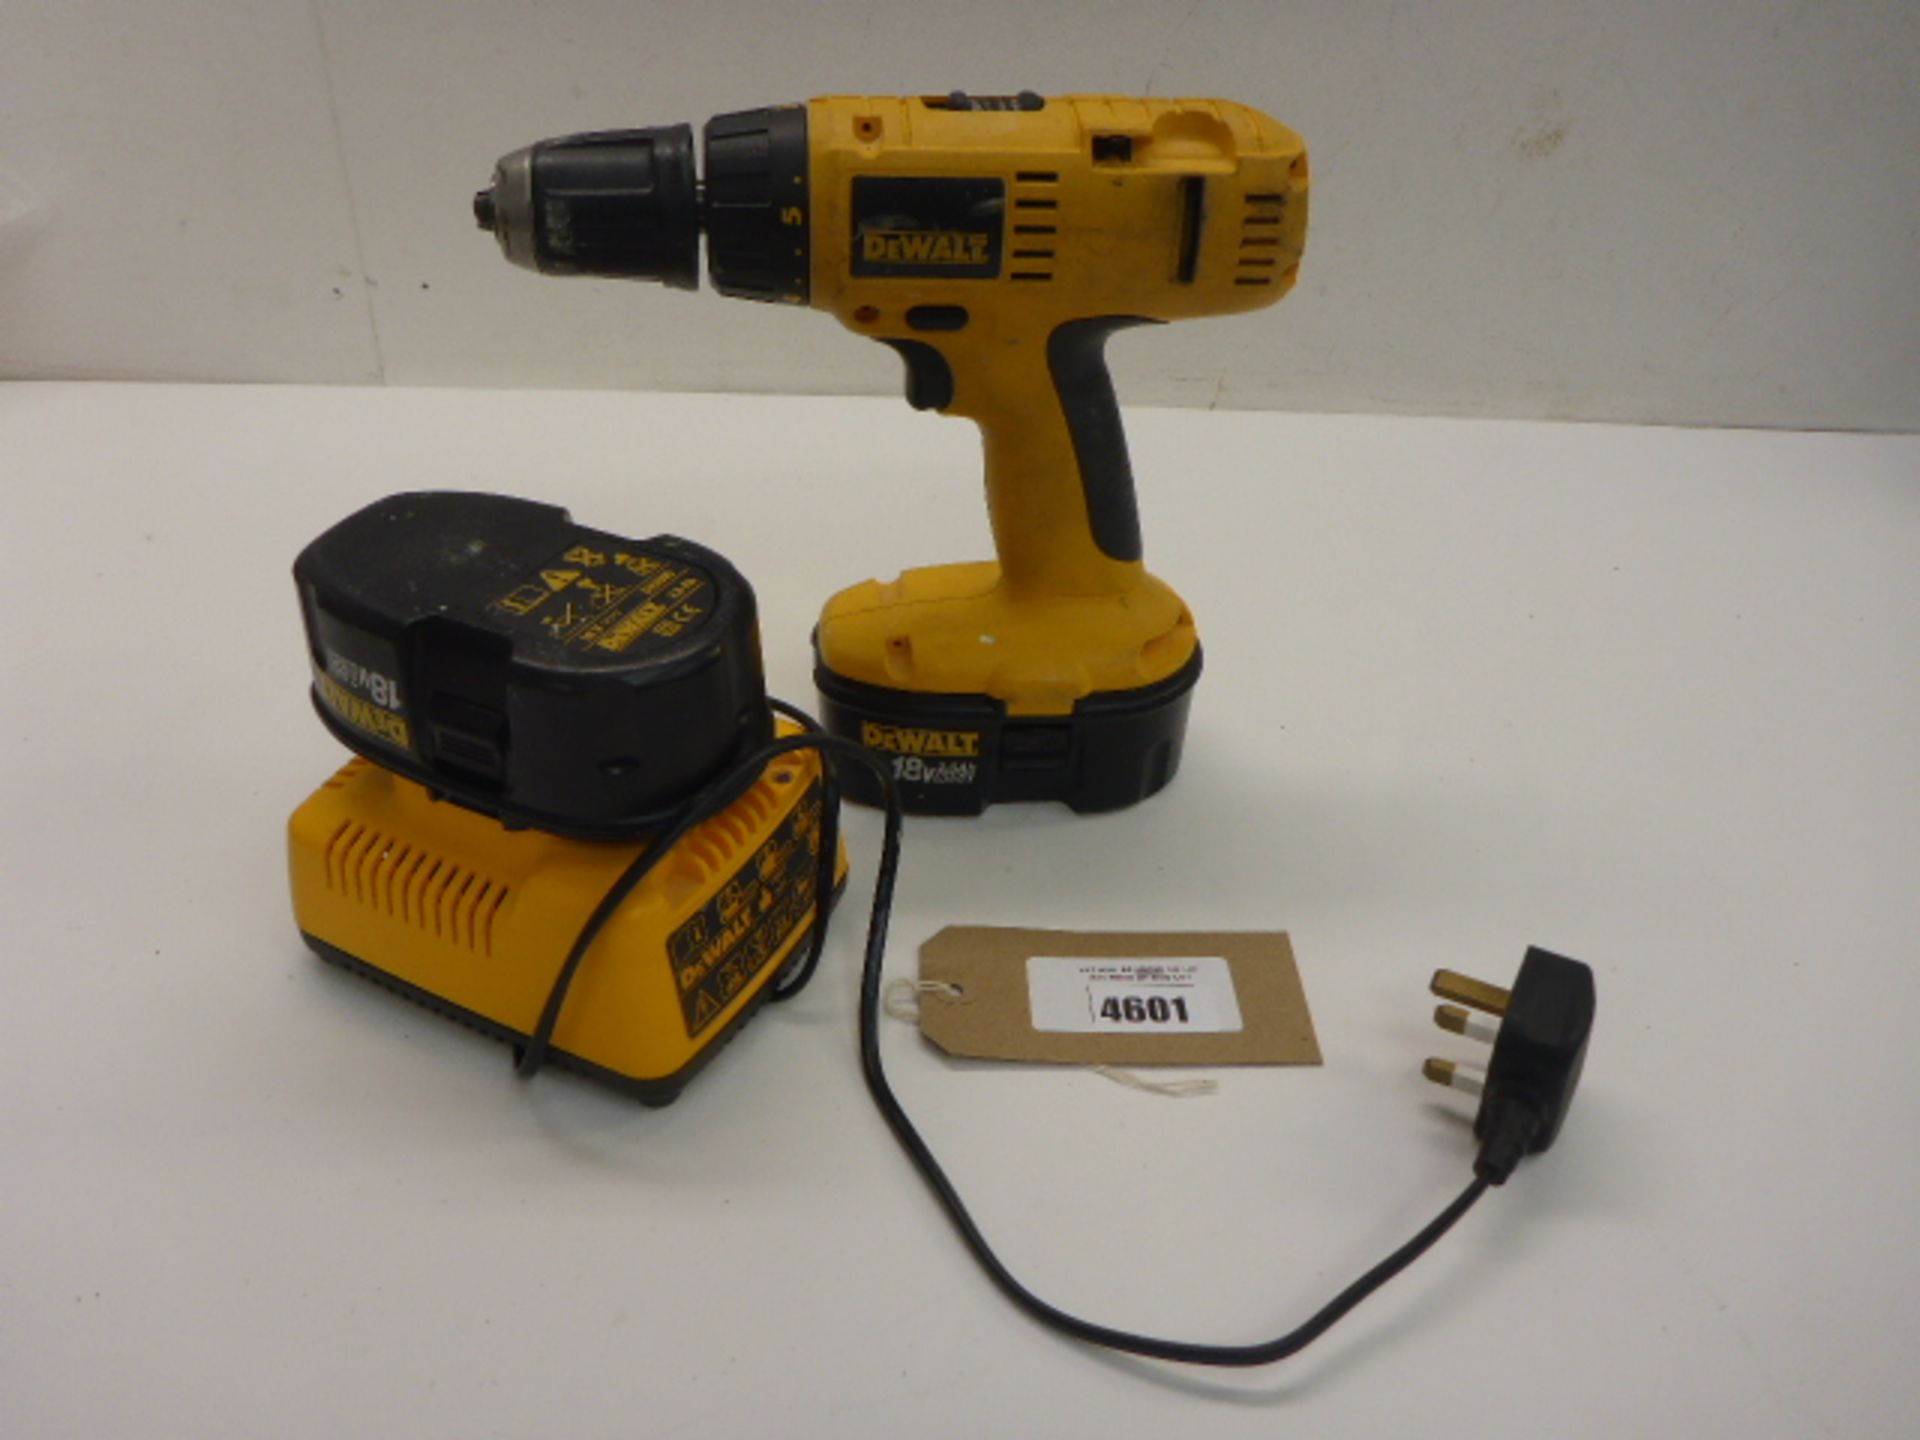 DeWalt 18v battery drill with 2 batteries and charger